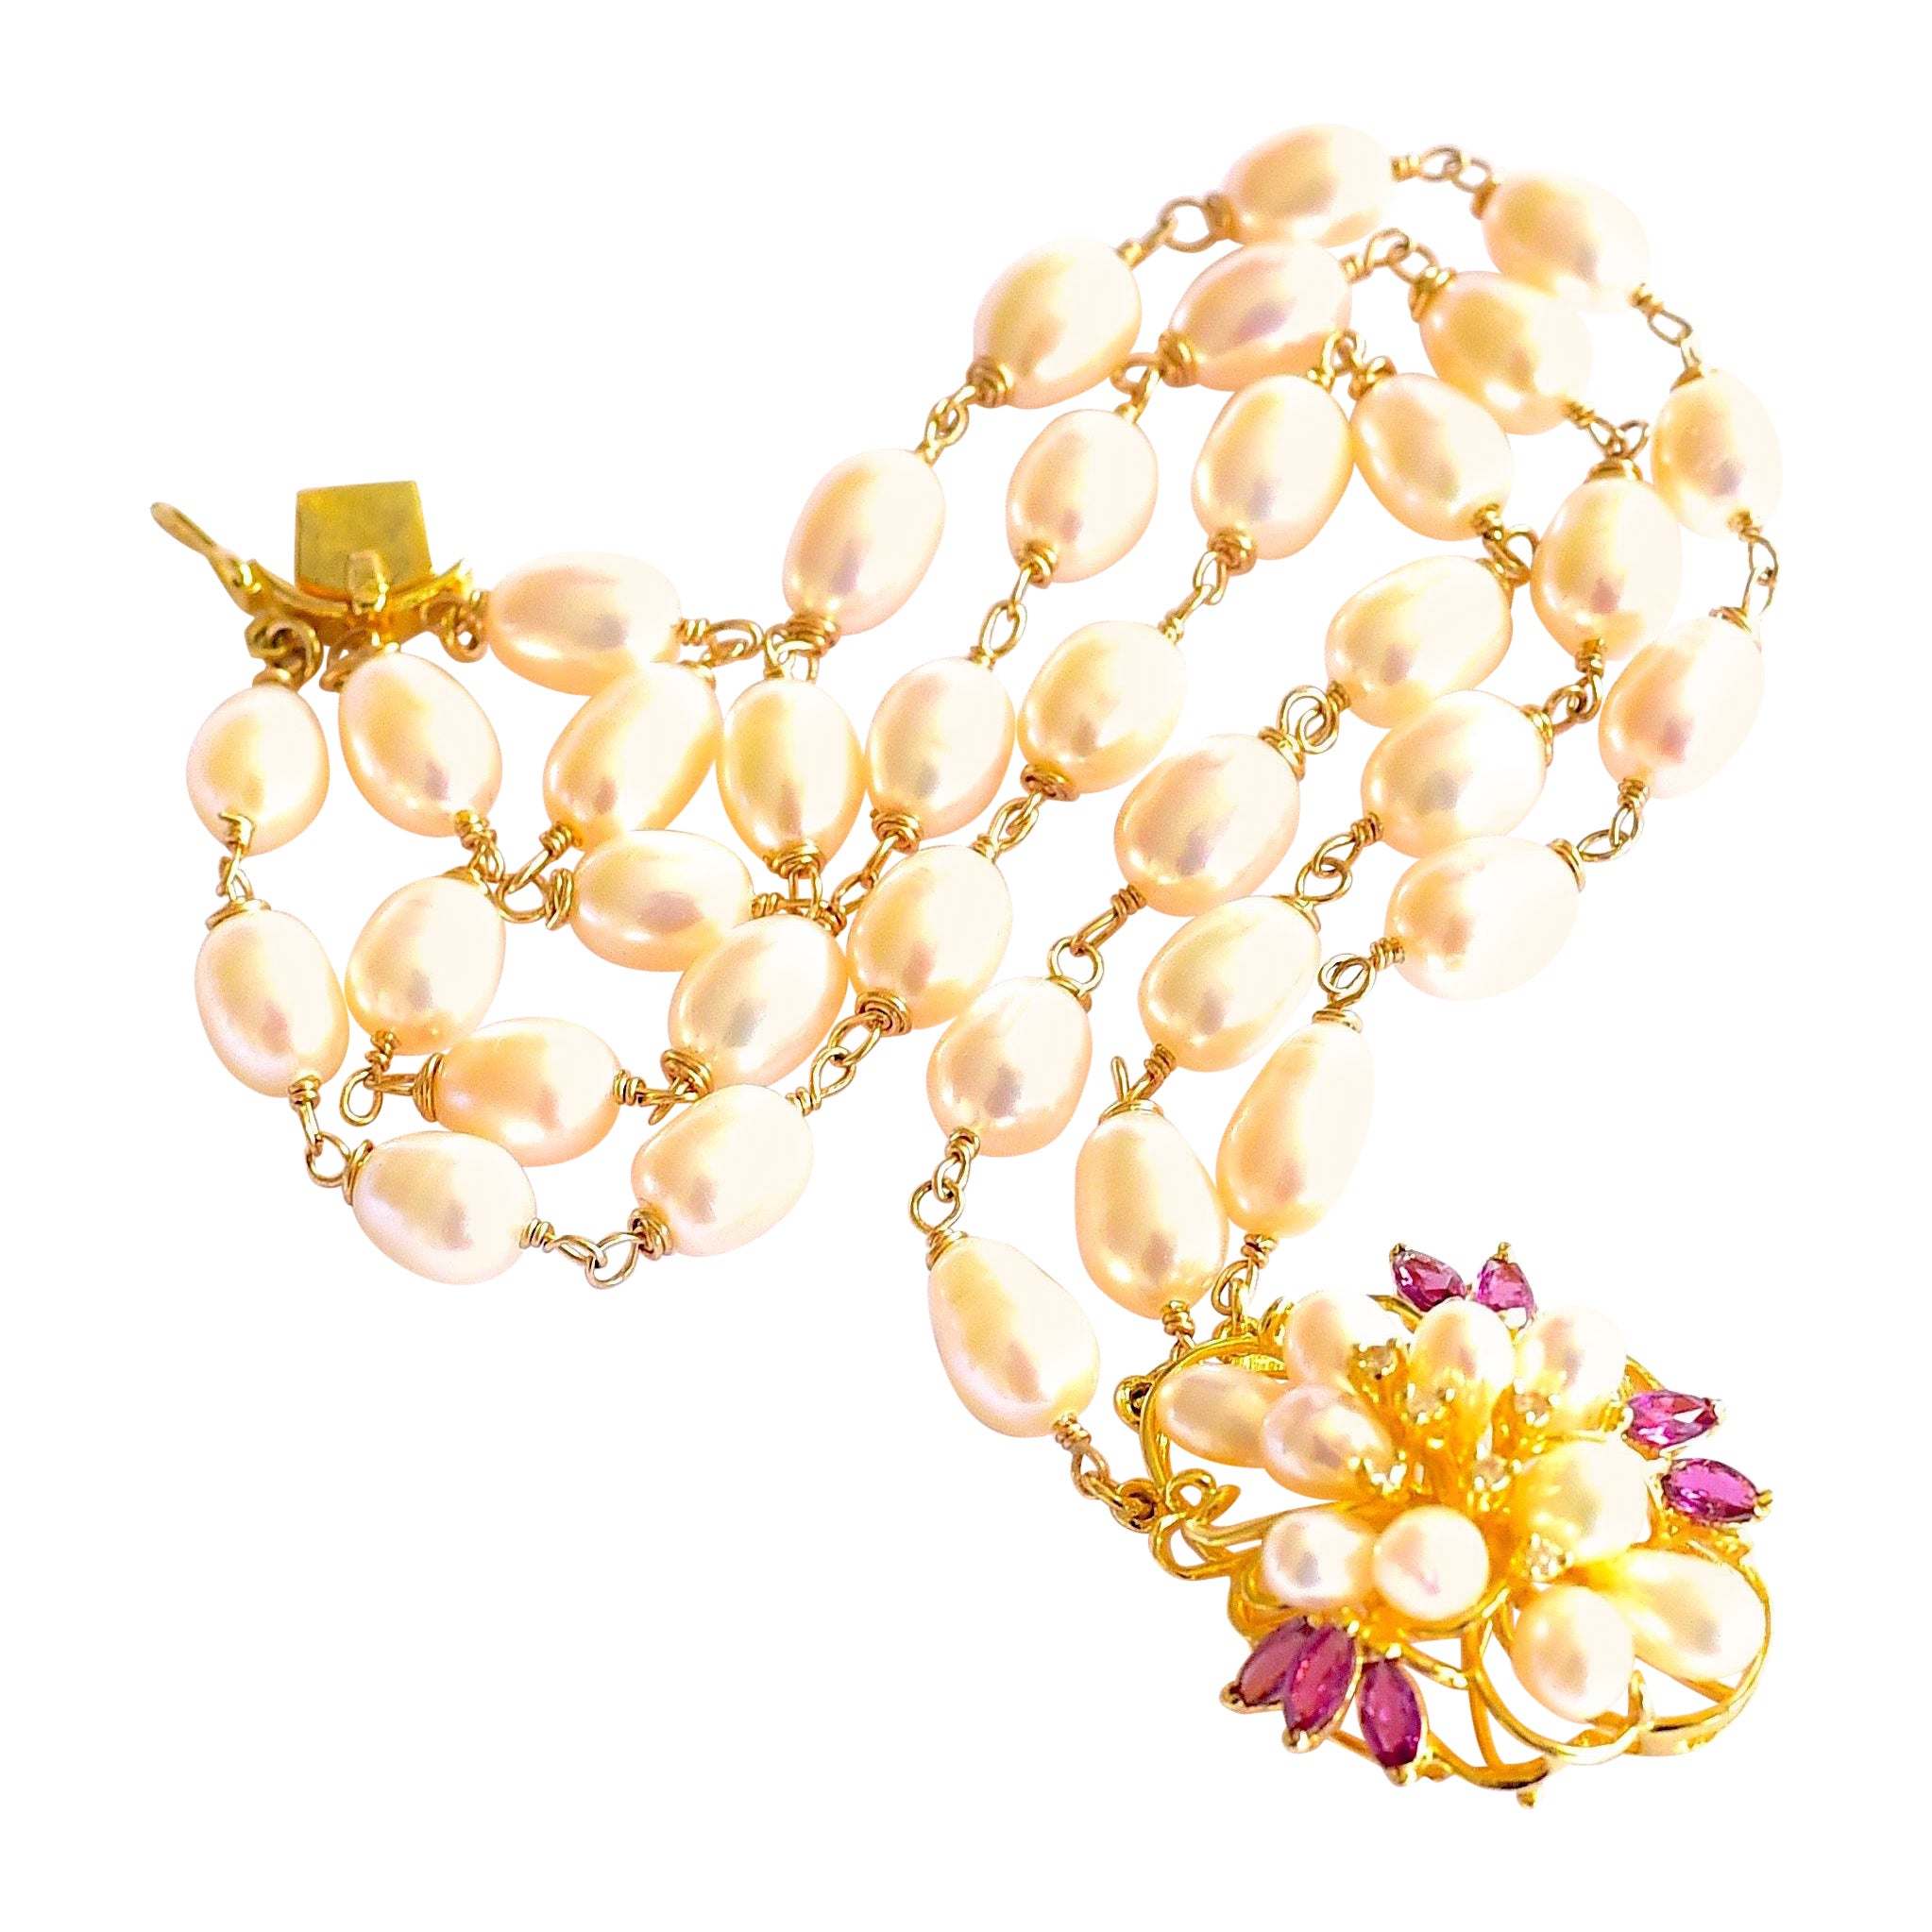 A stunning collection of rice shape freshwater pearls with amazing vintage style 14K yellow gold cluster clasp with pearl, diamond, ruby ornate floral. Not adjustable bracelet, but fits very well even larger hand. 
A wonderful bracelet for a lady! 